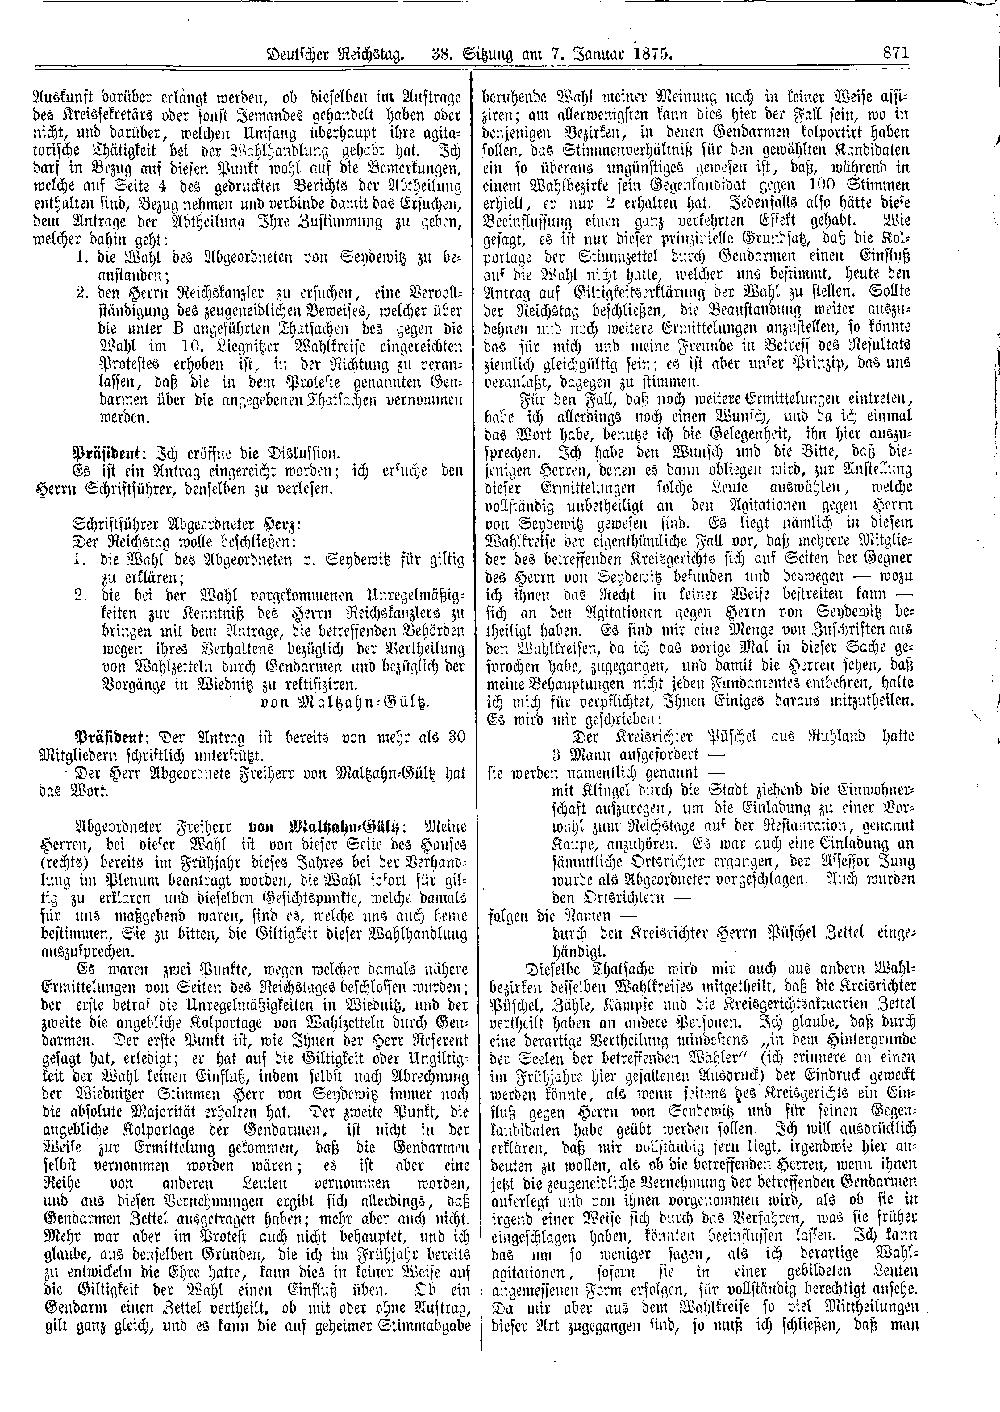 Scan of page 871